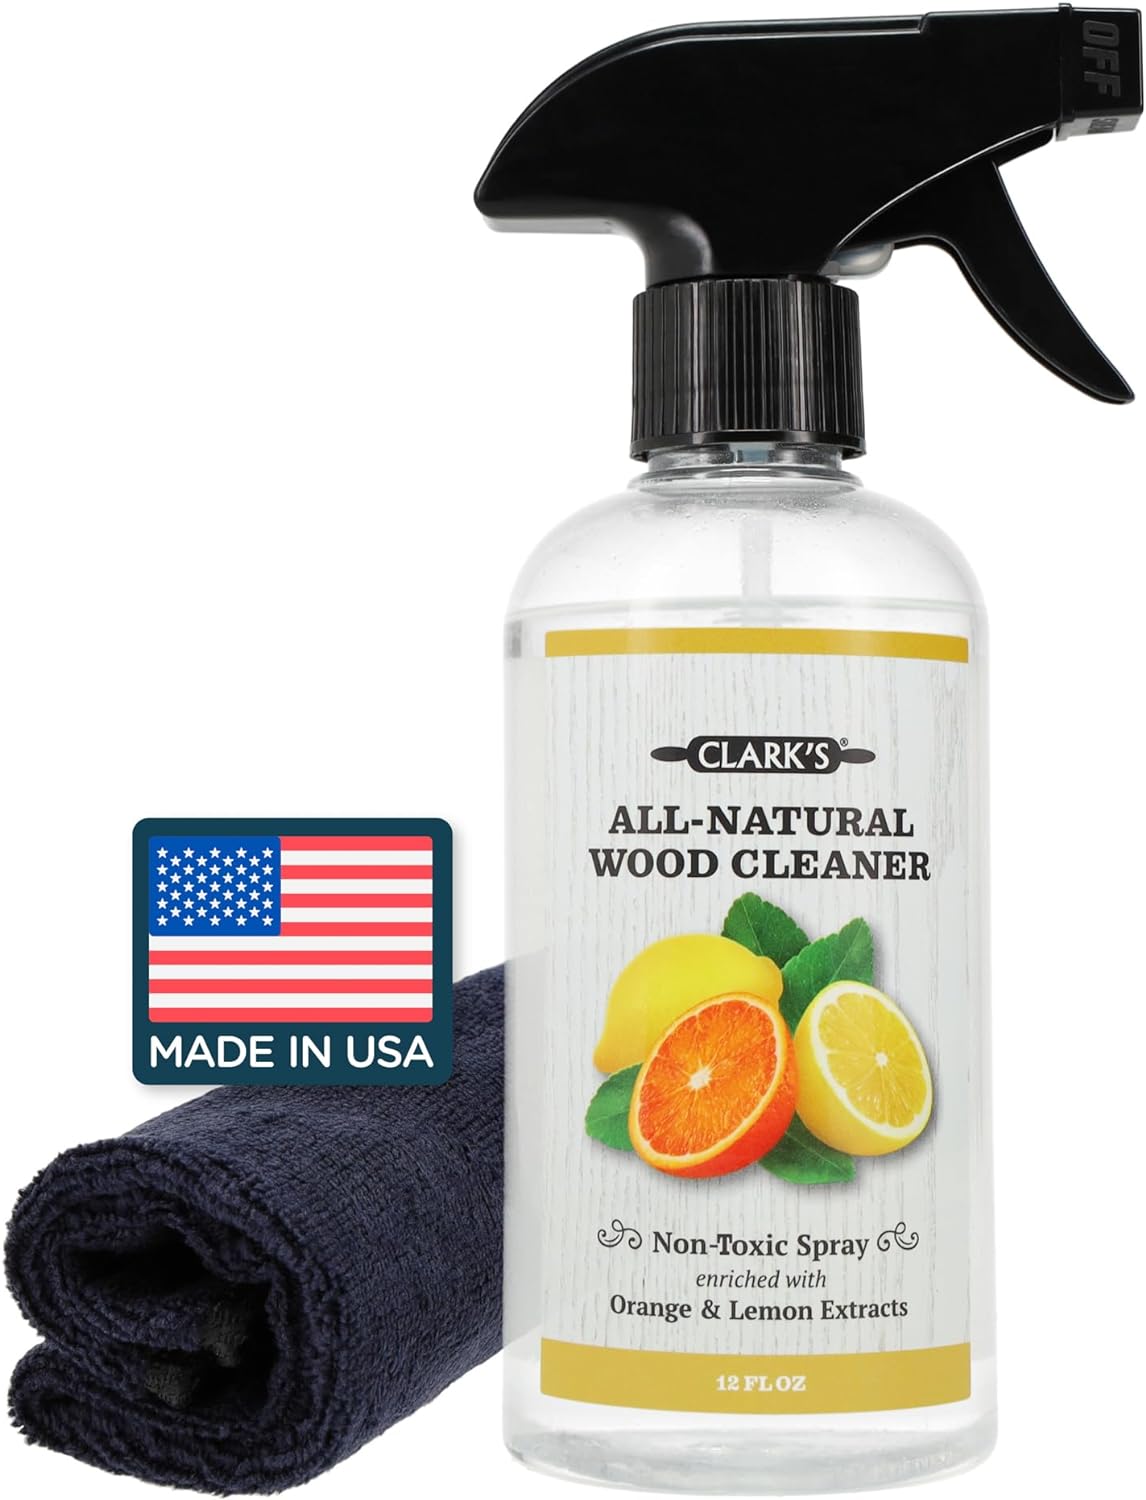 CLARK'S Natural Cutting Board Spray Cleaner, with Microfiber Cloth, for Wood Countertop – Pure Ingredients Filtered Water, Distilled Vinegar, Castile Soap, Lemon & Orange Citrus Oil Extracts, 12oz